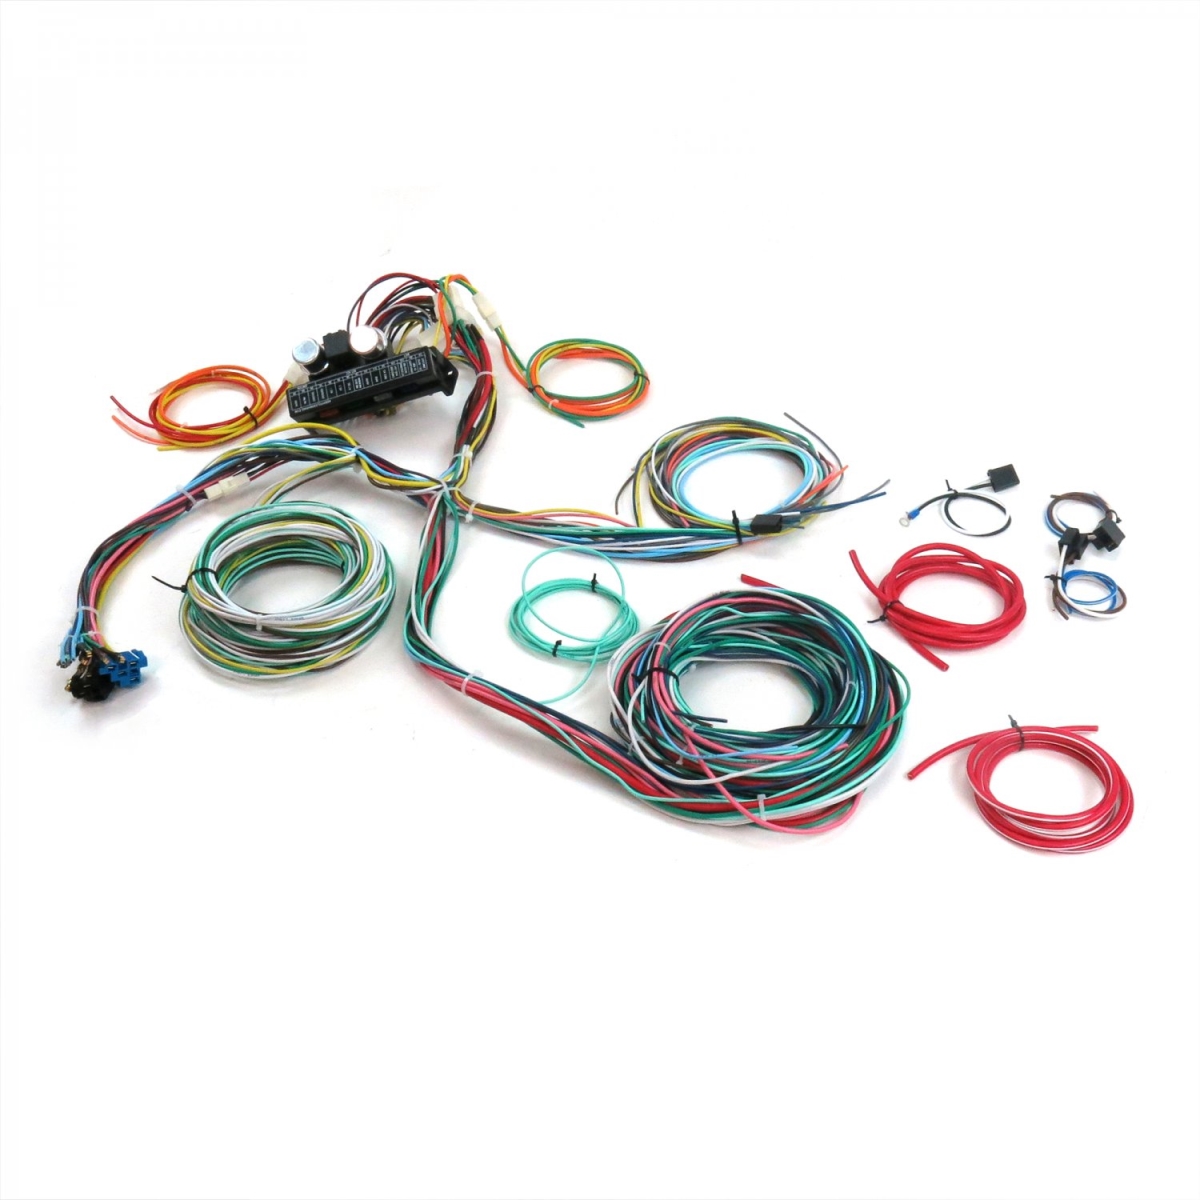 689849 15 Fuse 12V Conversion Wiring Harness for 1935 Ford Model 48 Sedan - 2-Door, 4-Door -  Keep It Clean Wiring Accessories